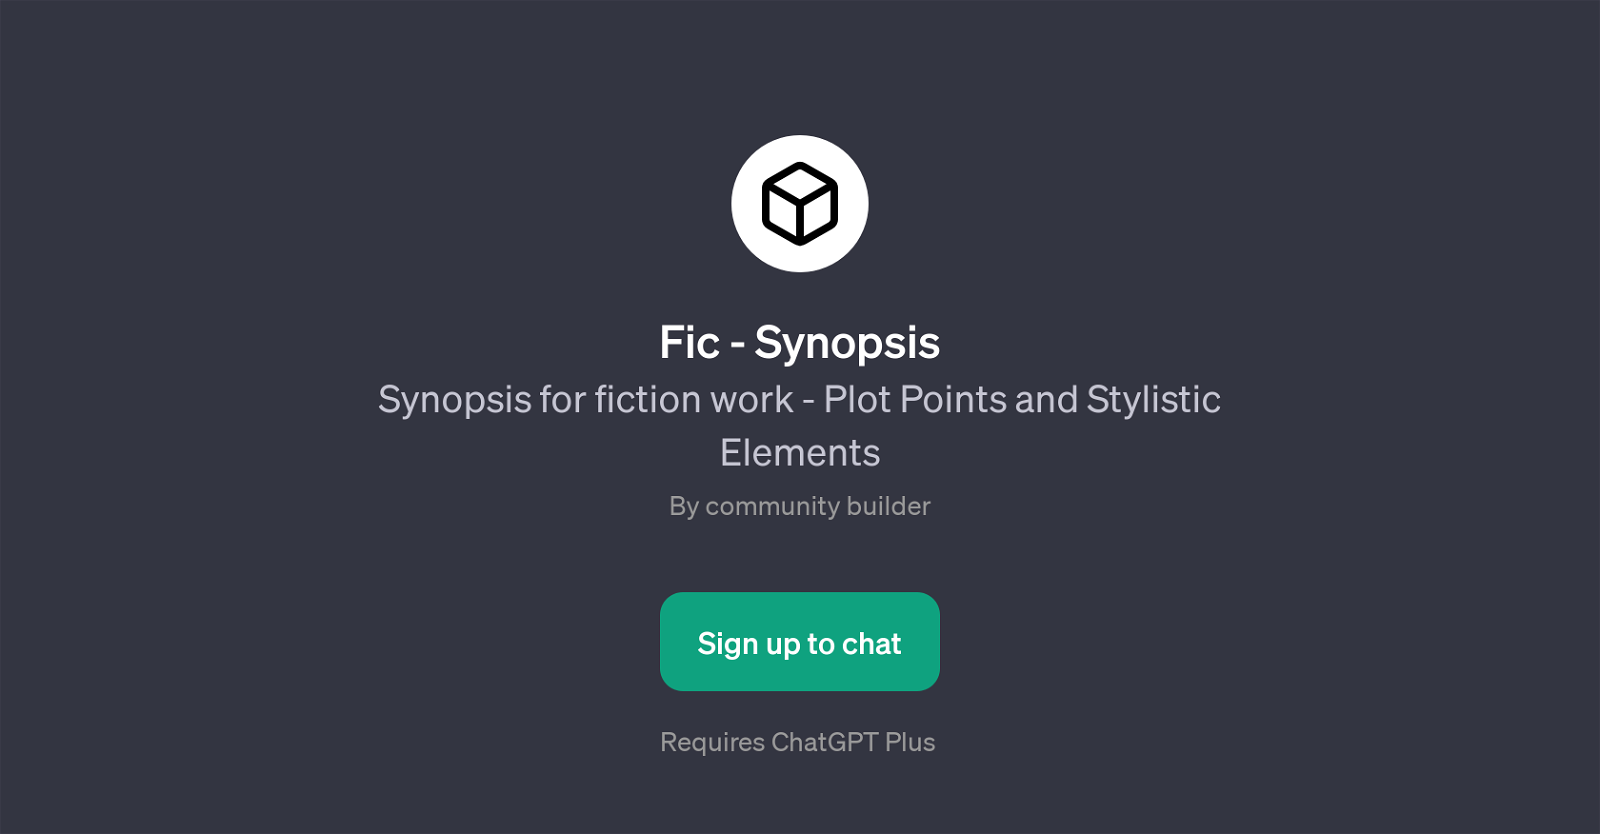 Fic - Synopsis website